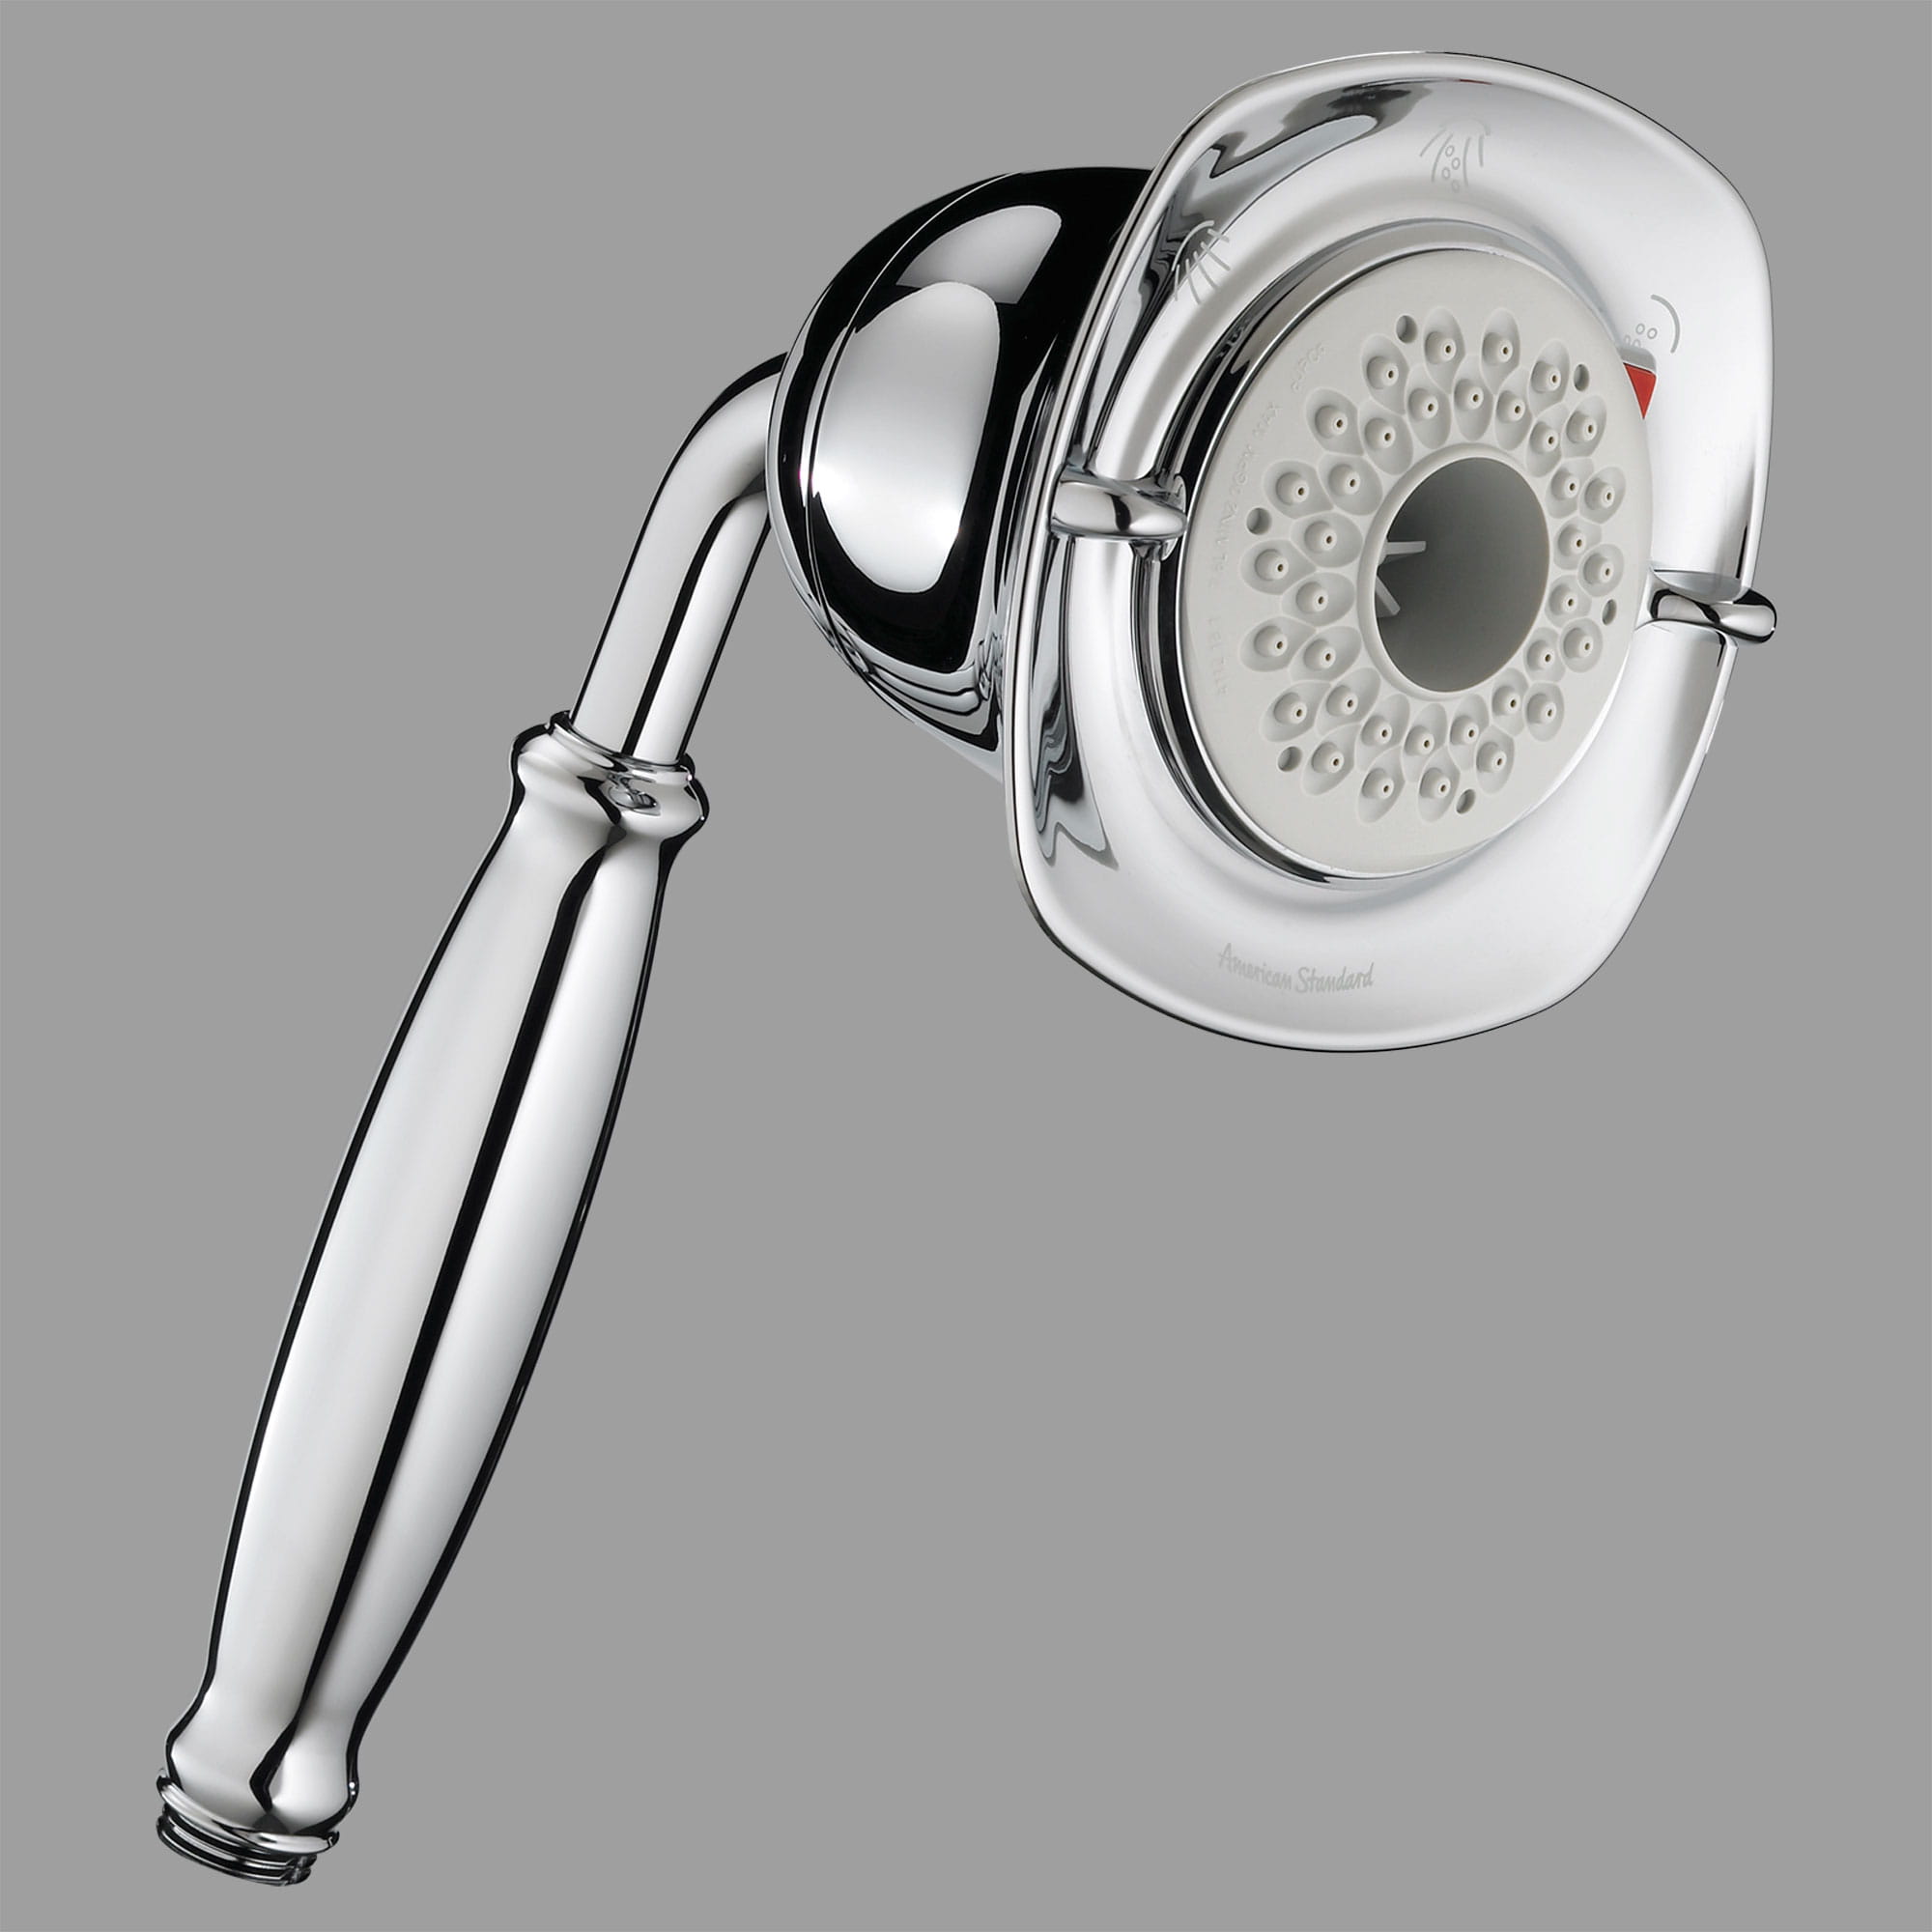 FloWise Square Transitional 20 GPM 10 In 3 Function Hand Shower CHROME